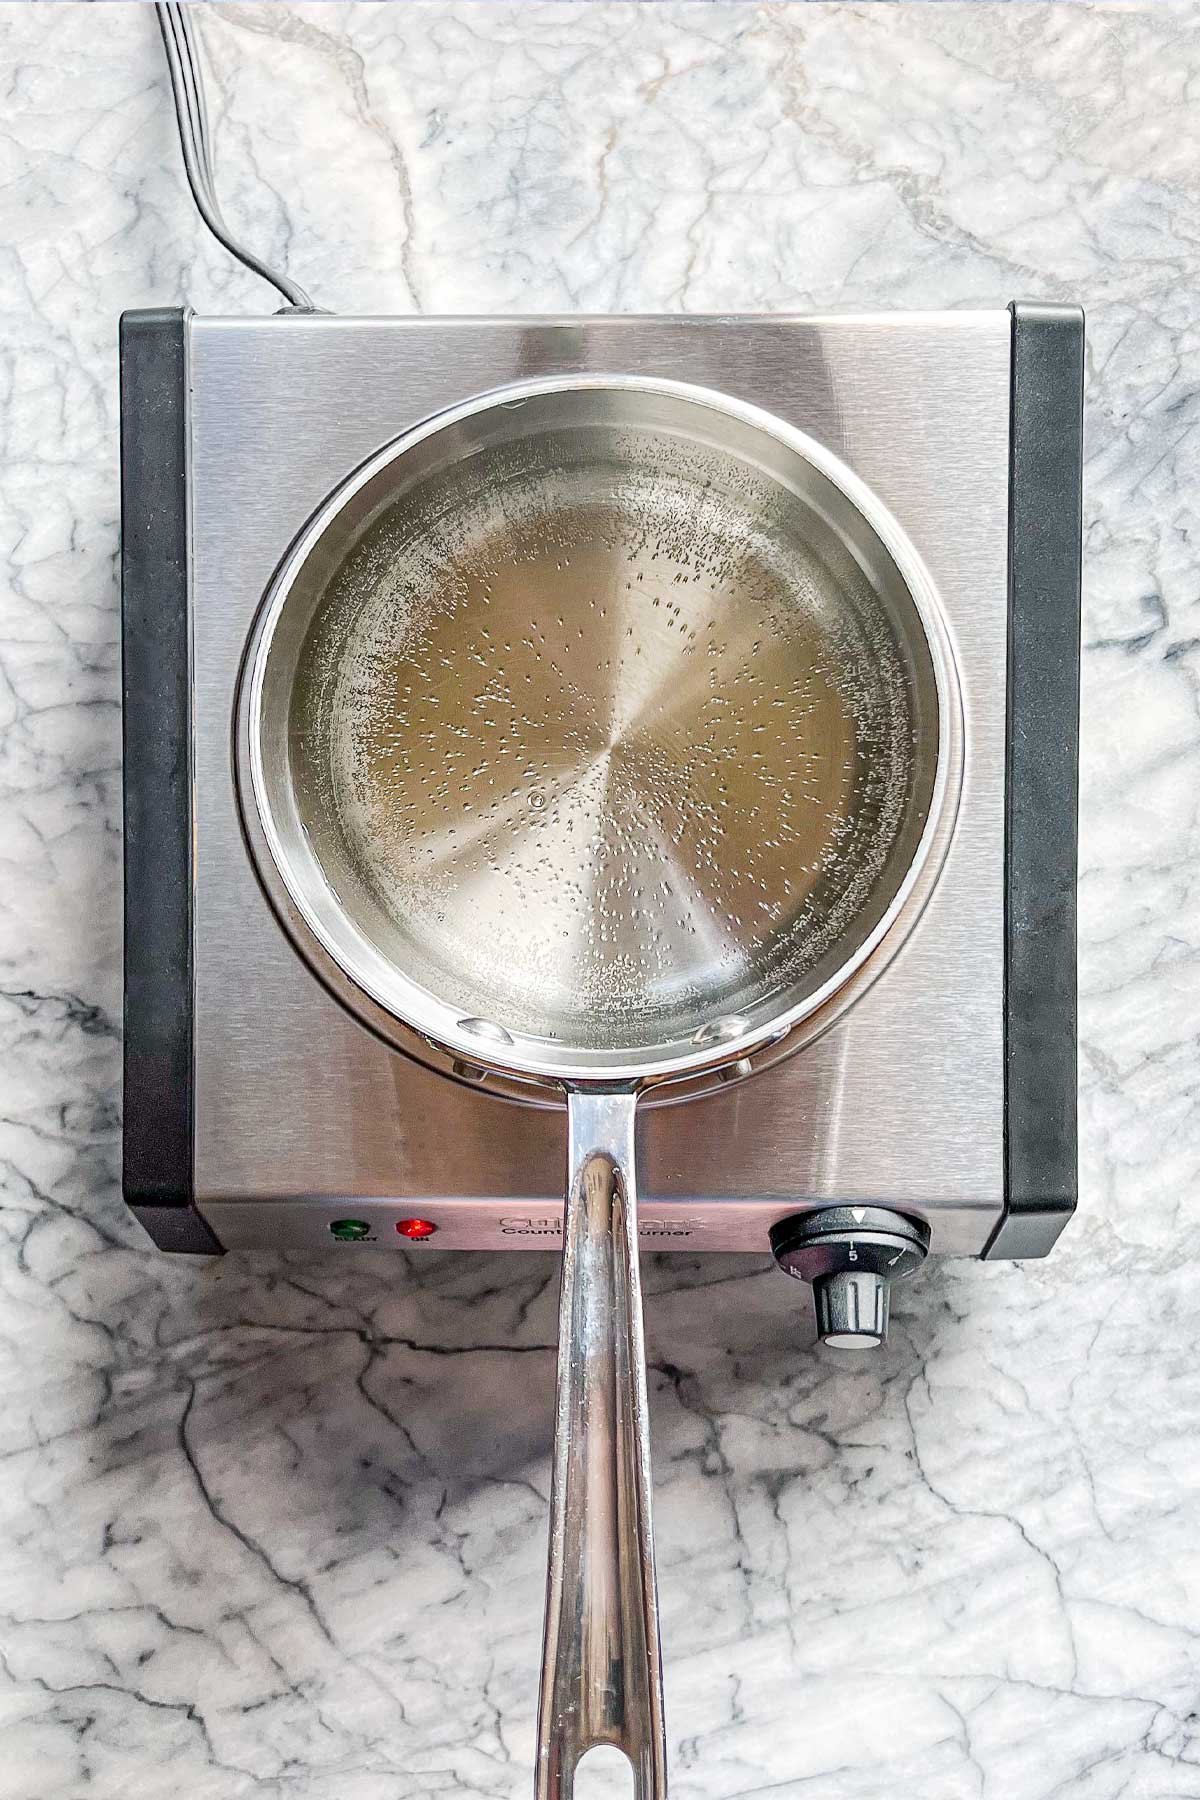 A pot of water starting to boil on a burner.